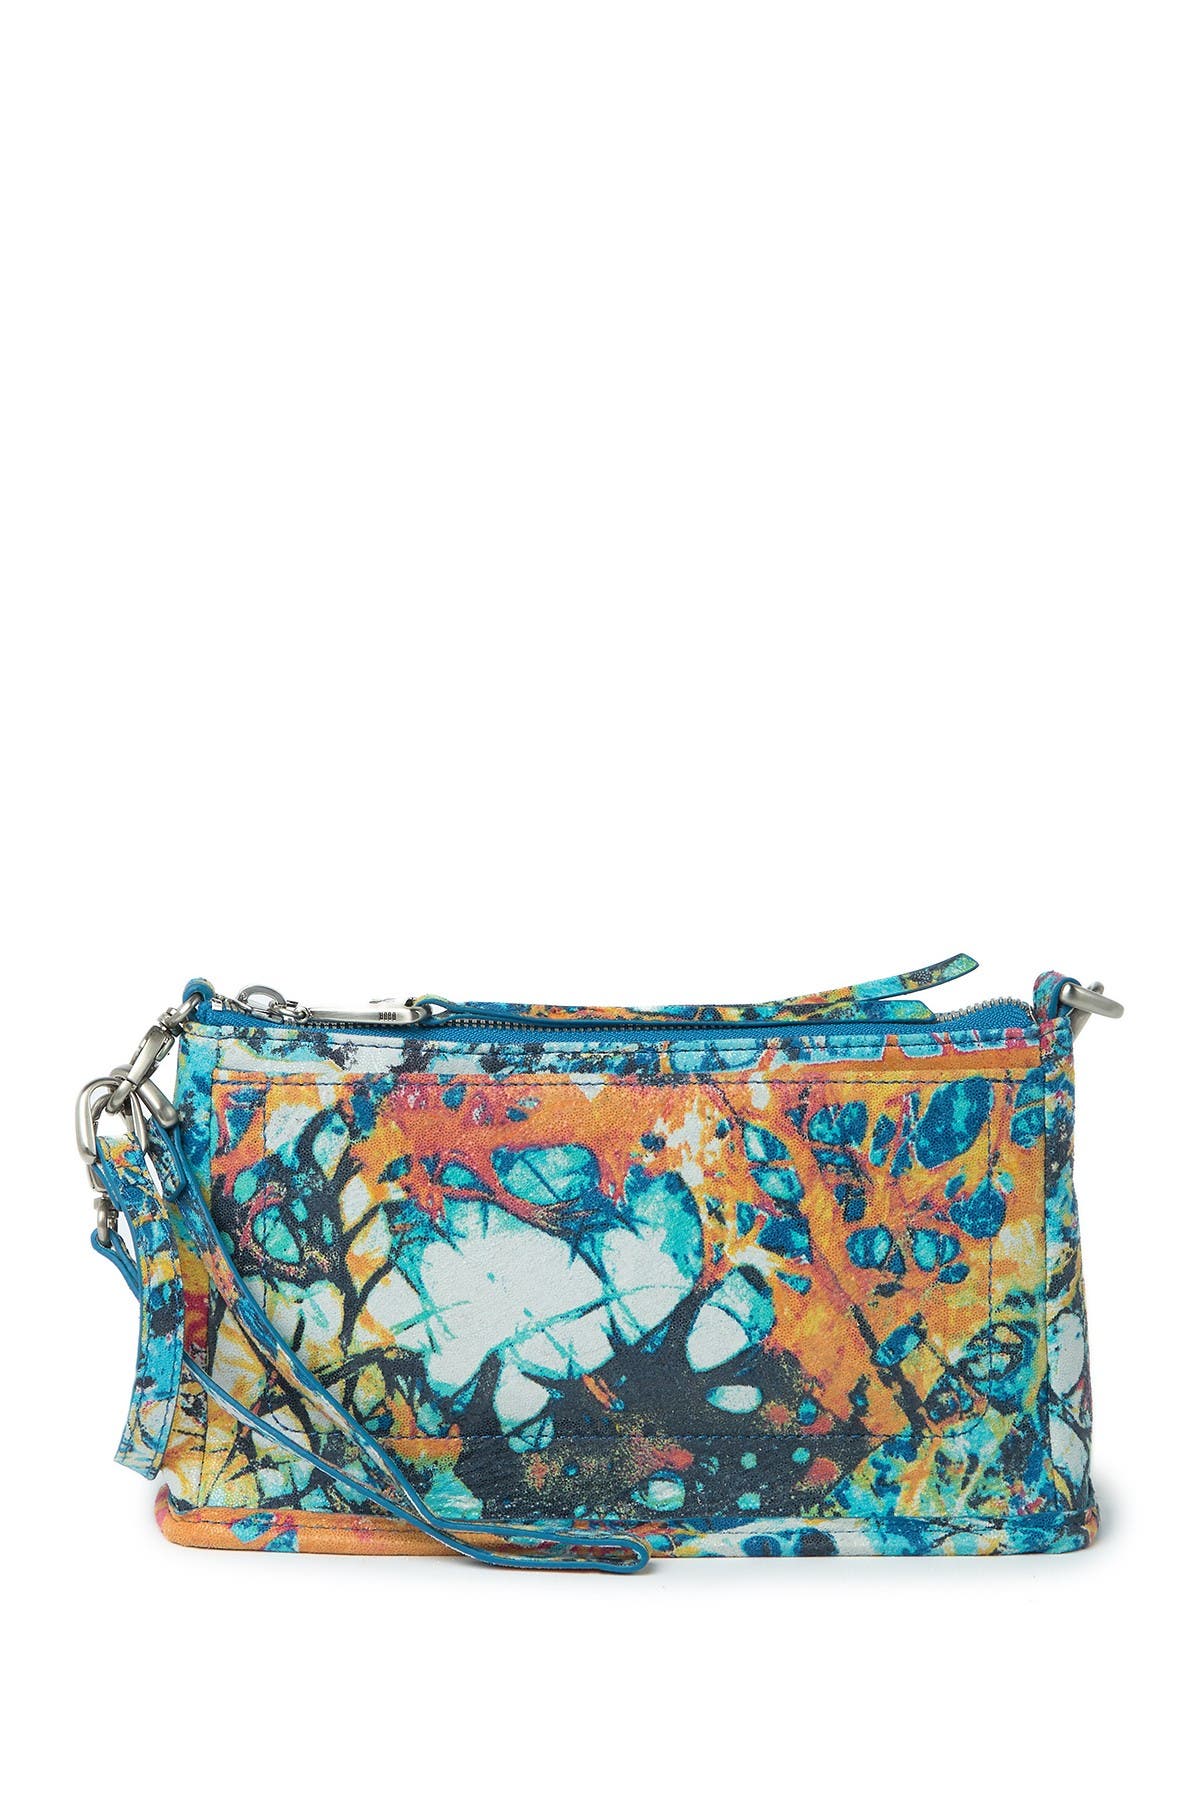 Hobo Small Cadence Crossbody Bag In Summertime Abstract